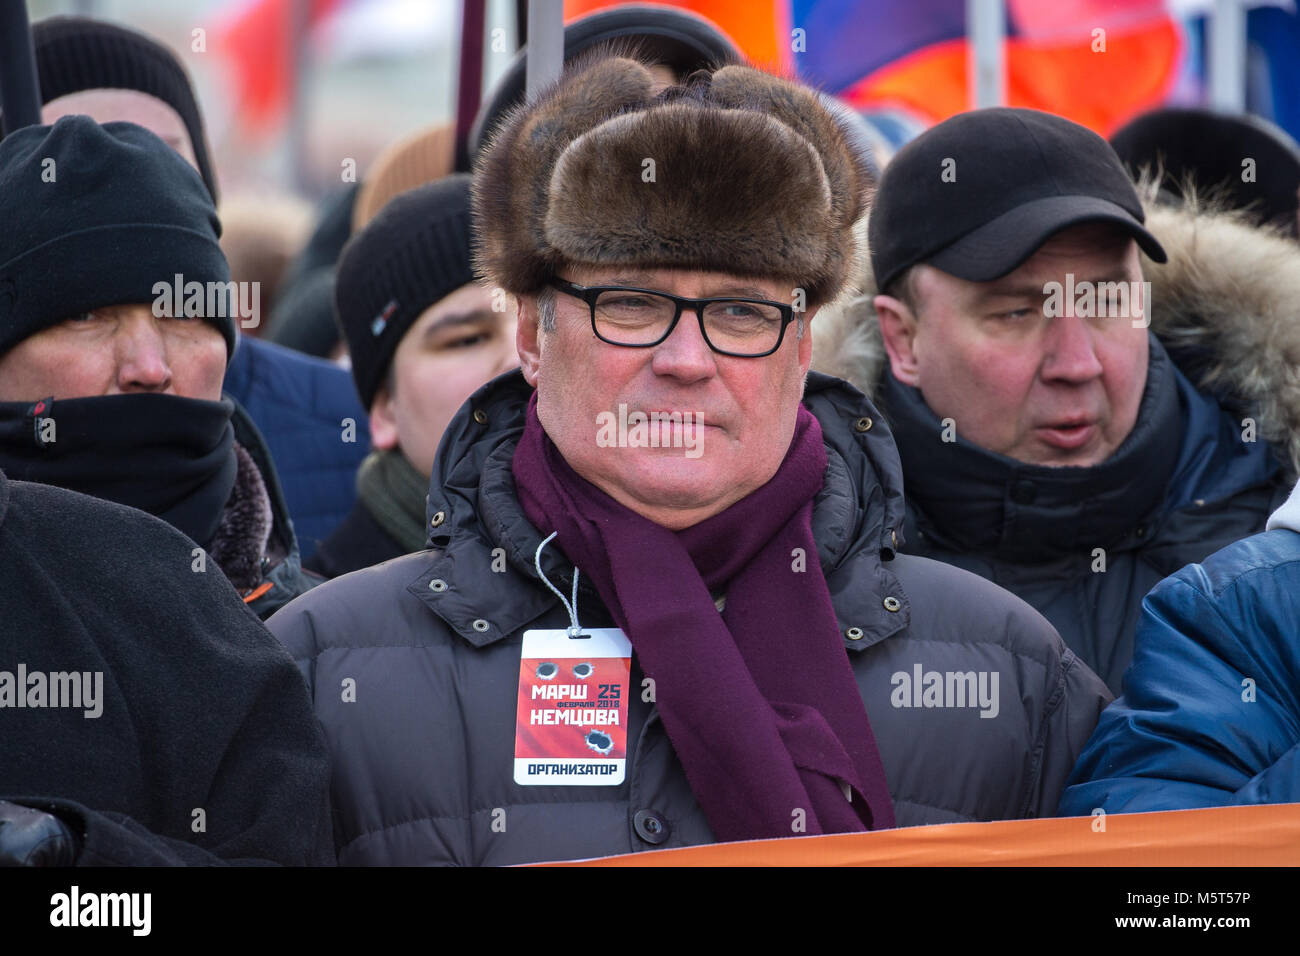 Moscow, Russia. 25th February 2018. Chairman of the People's Freedom Party (PARNAS) Mikhail Kasyanov (center), take part in a march in memory of Russian politician and opposition leader Boris Nemtsov on the eve of the 3rd anniversary of his death. Boris Nemtsov was shot dead on Bolshoi Moskvoretsky Bridge in the evening of February 27, 2015. Credit: Victor Vytolskiy/Alamy Live News Stock Photo